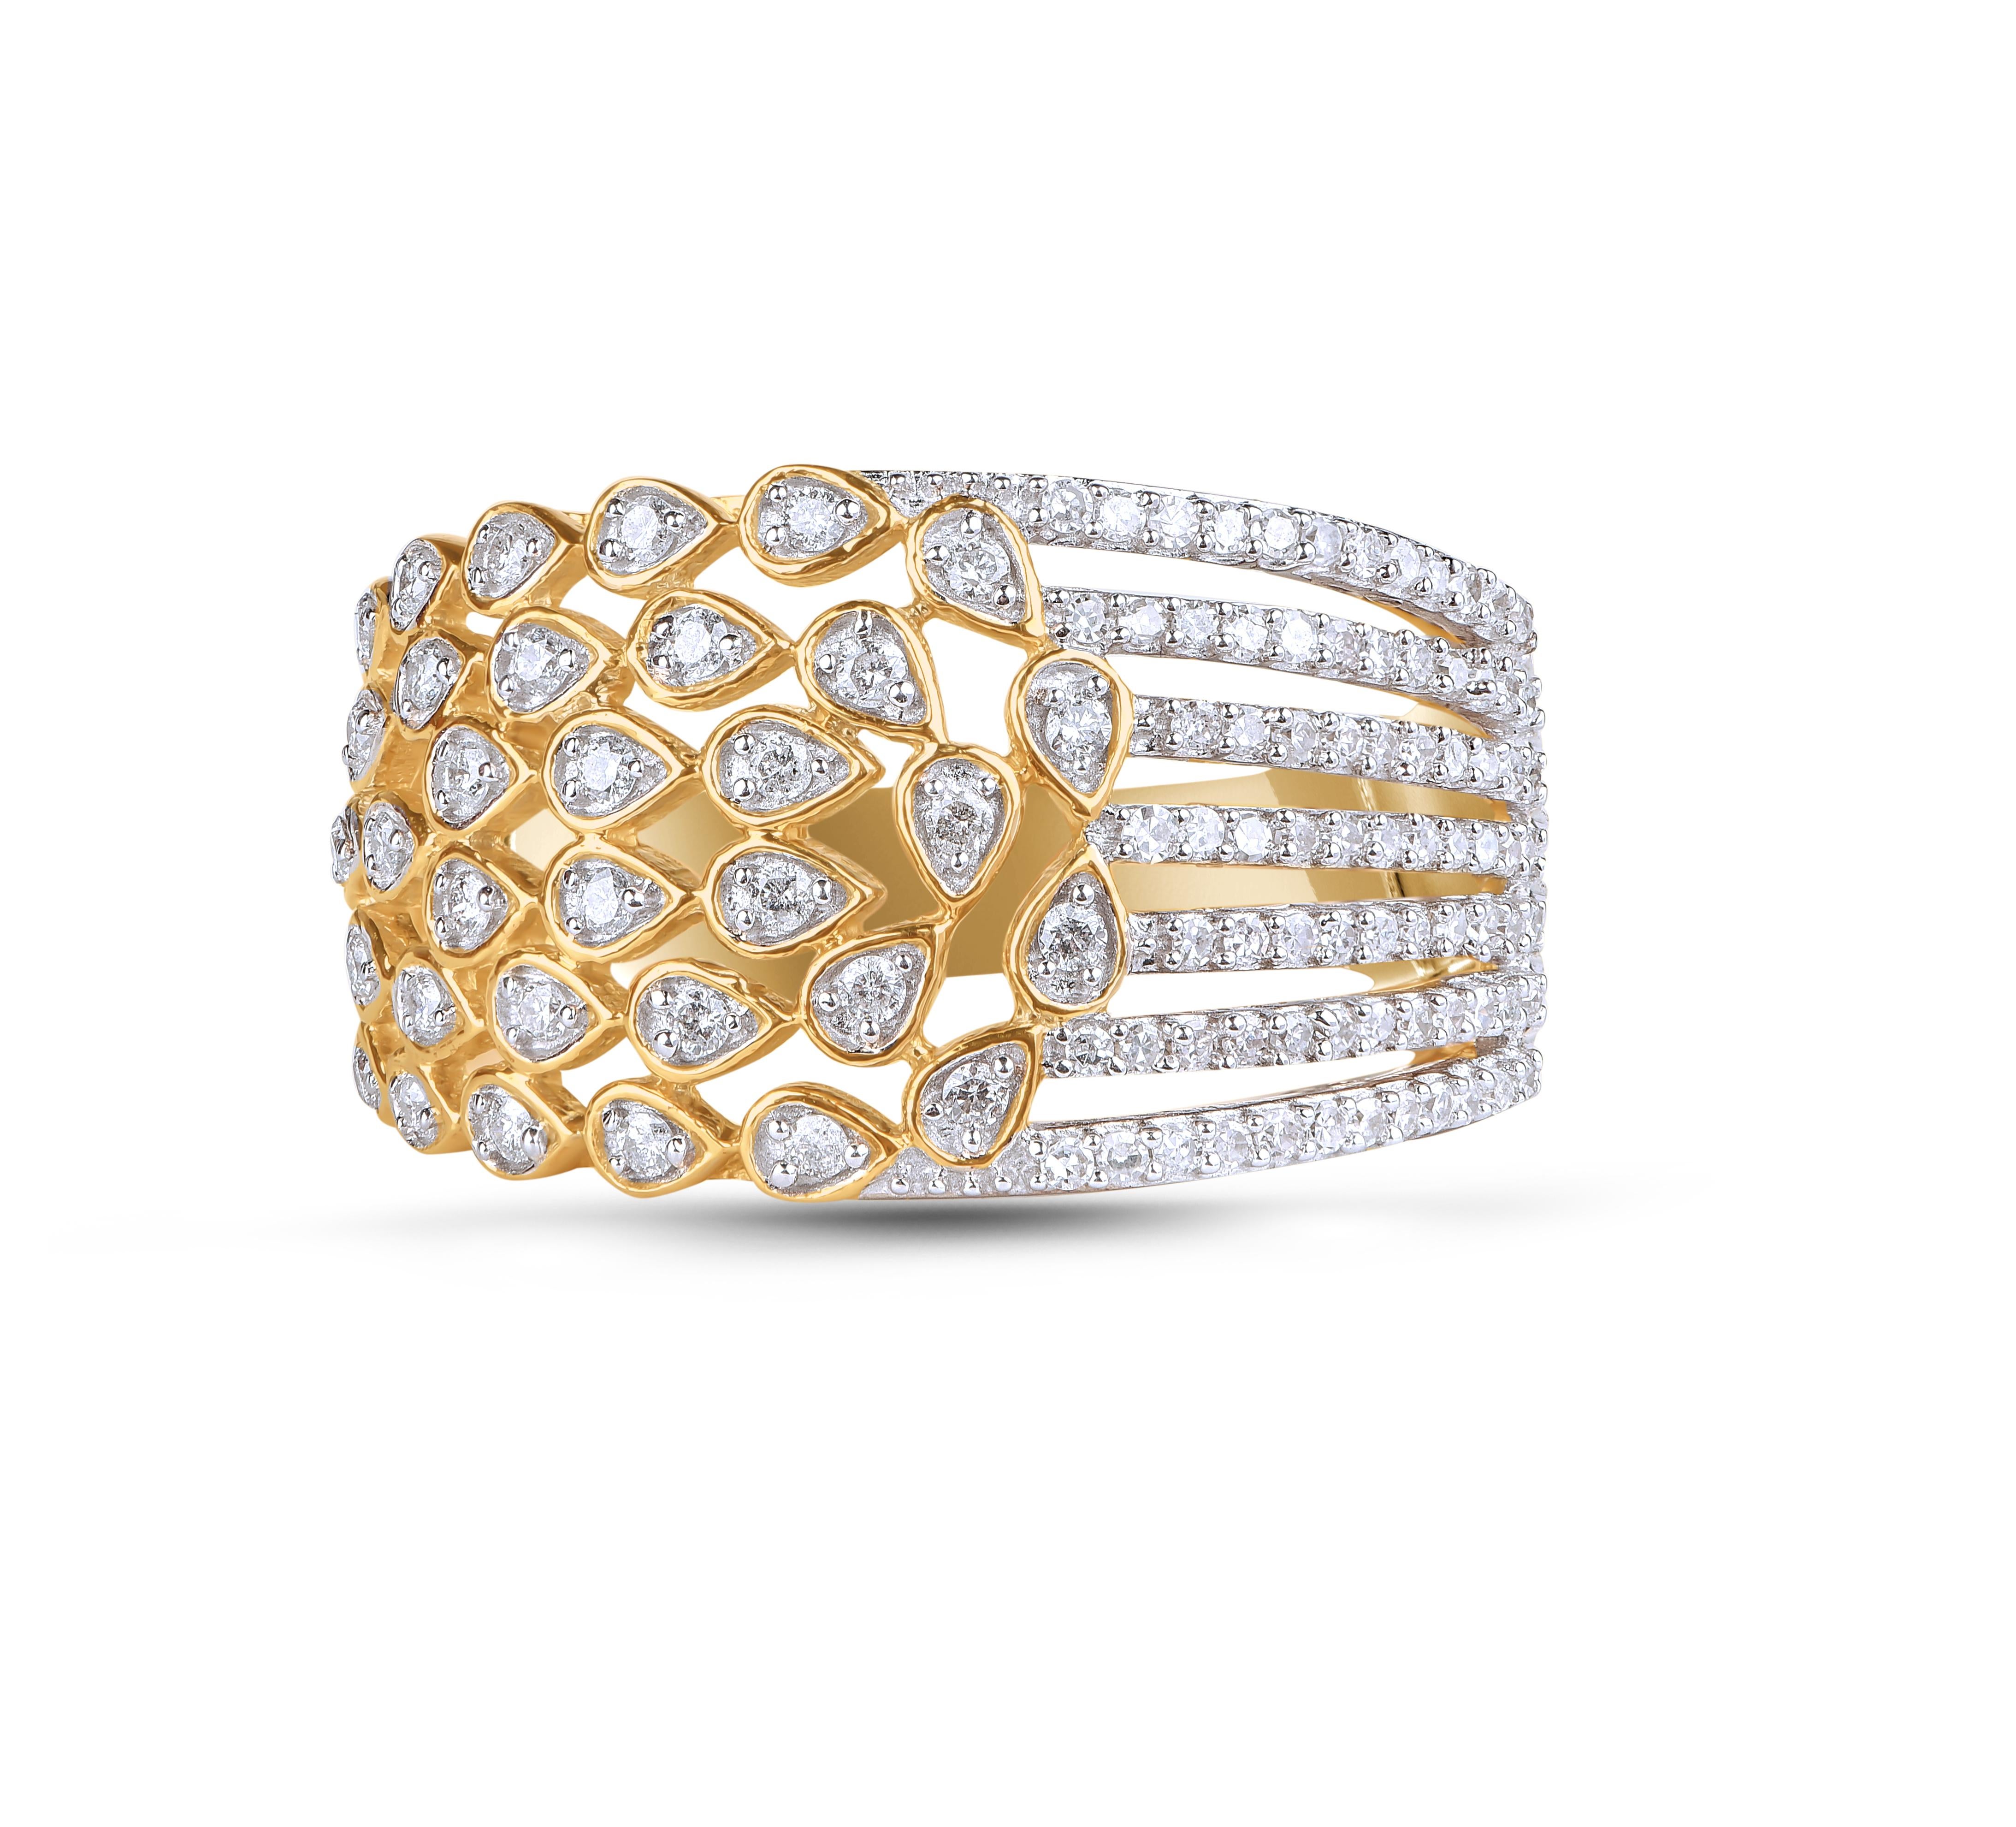 Bring charm to your look with this diamond ring. The ring is crafted from 14-karat gold in your choice of white, rose, or yellow, and features 112 round single cut and brilliant cut diamond set in prong and pave setting, shine in H-I color I2